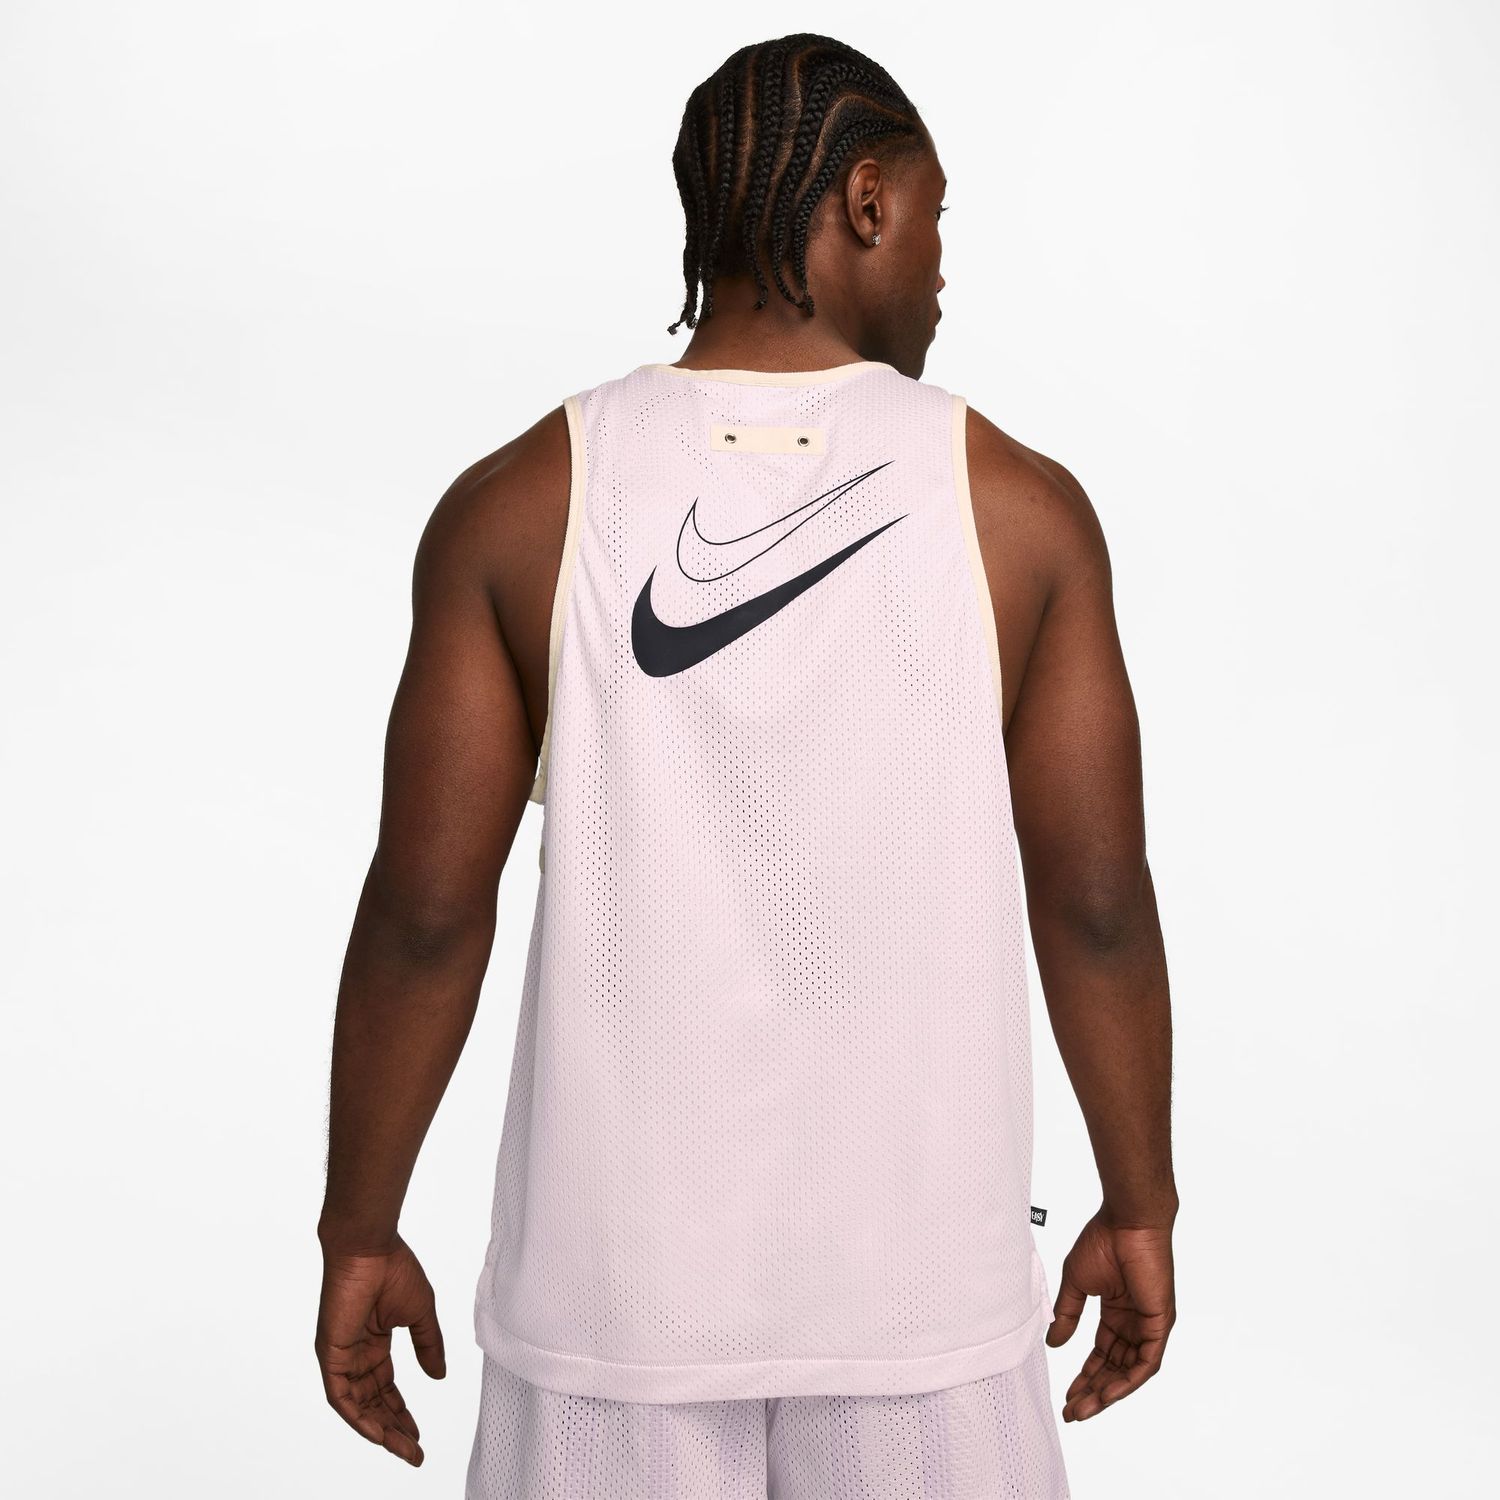 Nike Kevin Durant Mesh Jersey